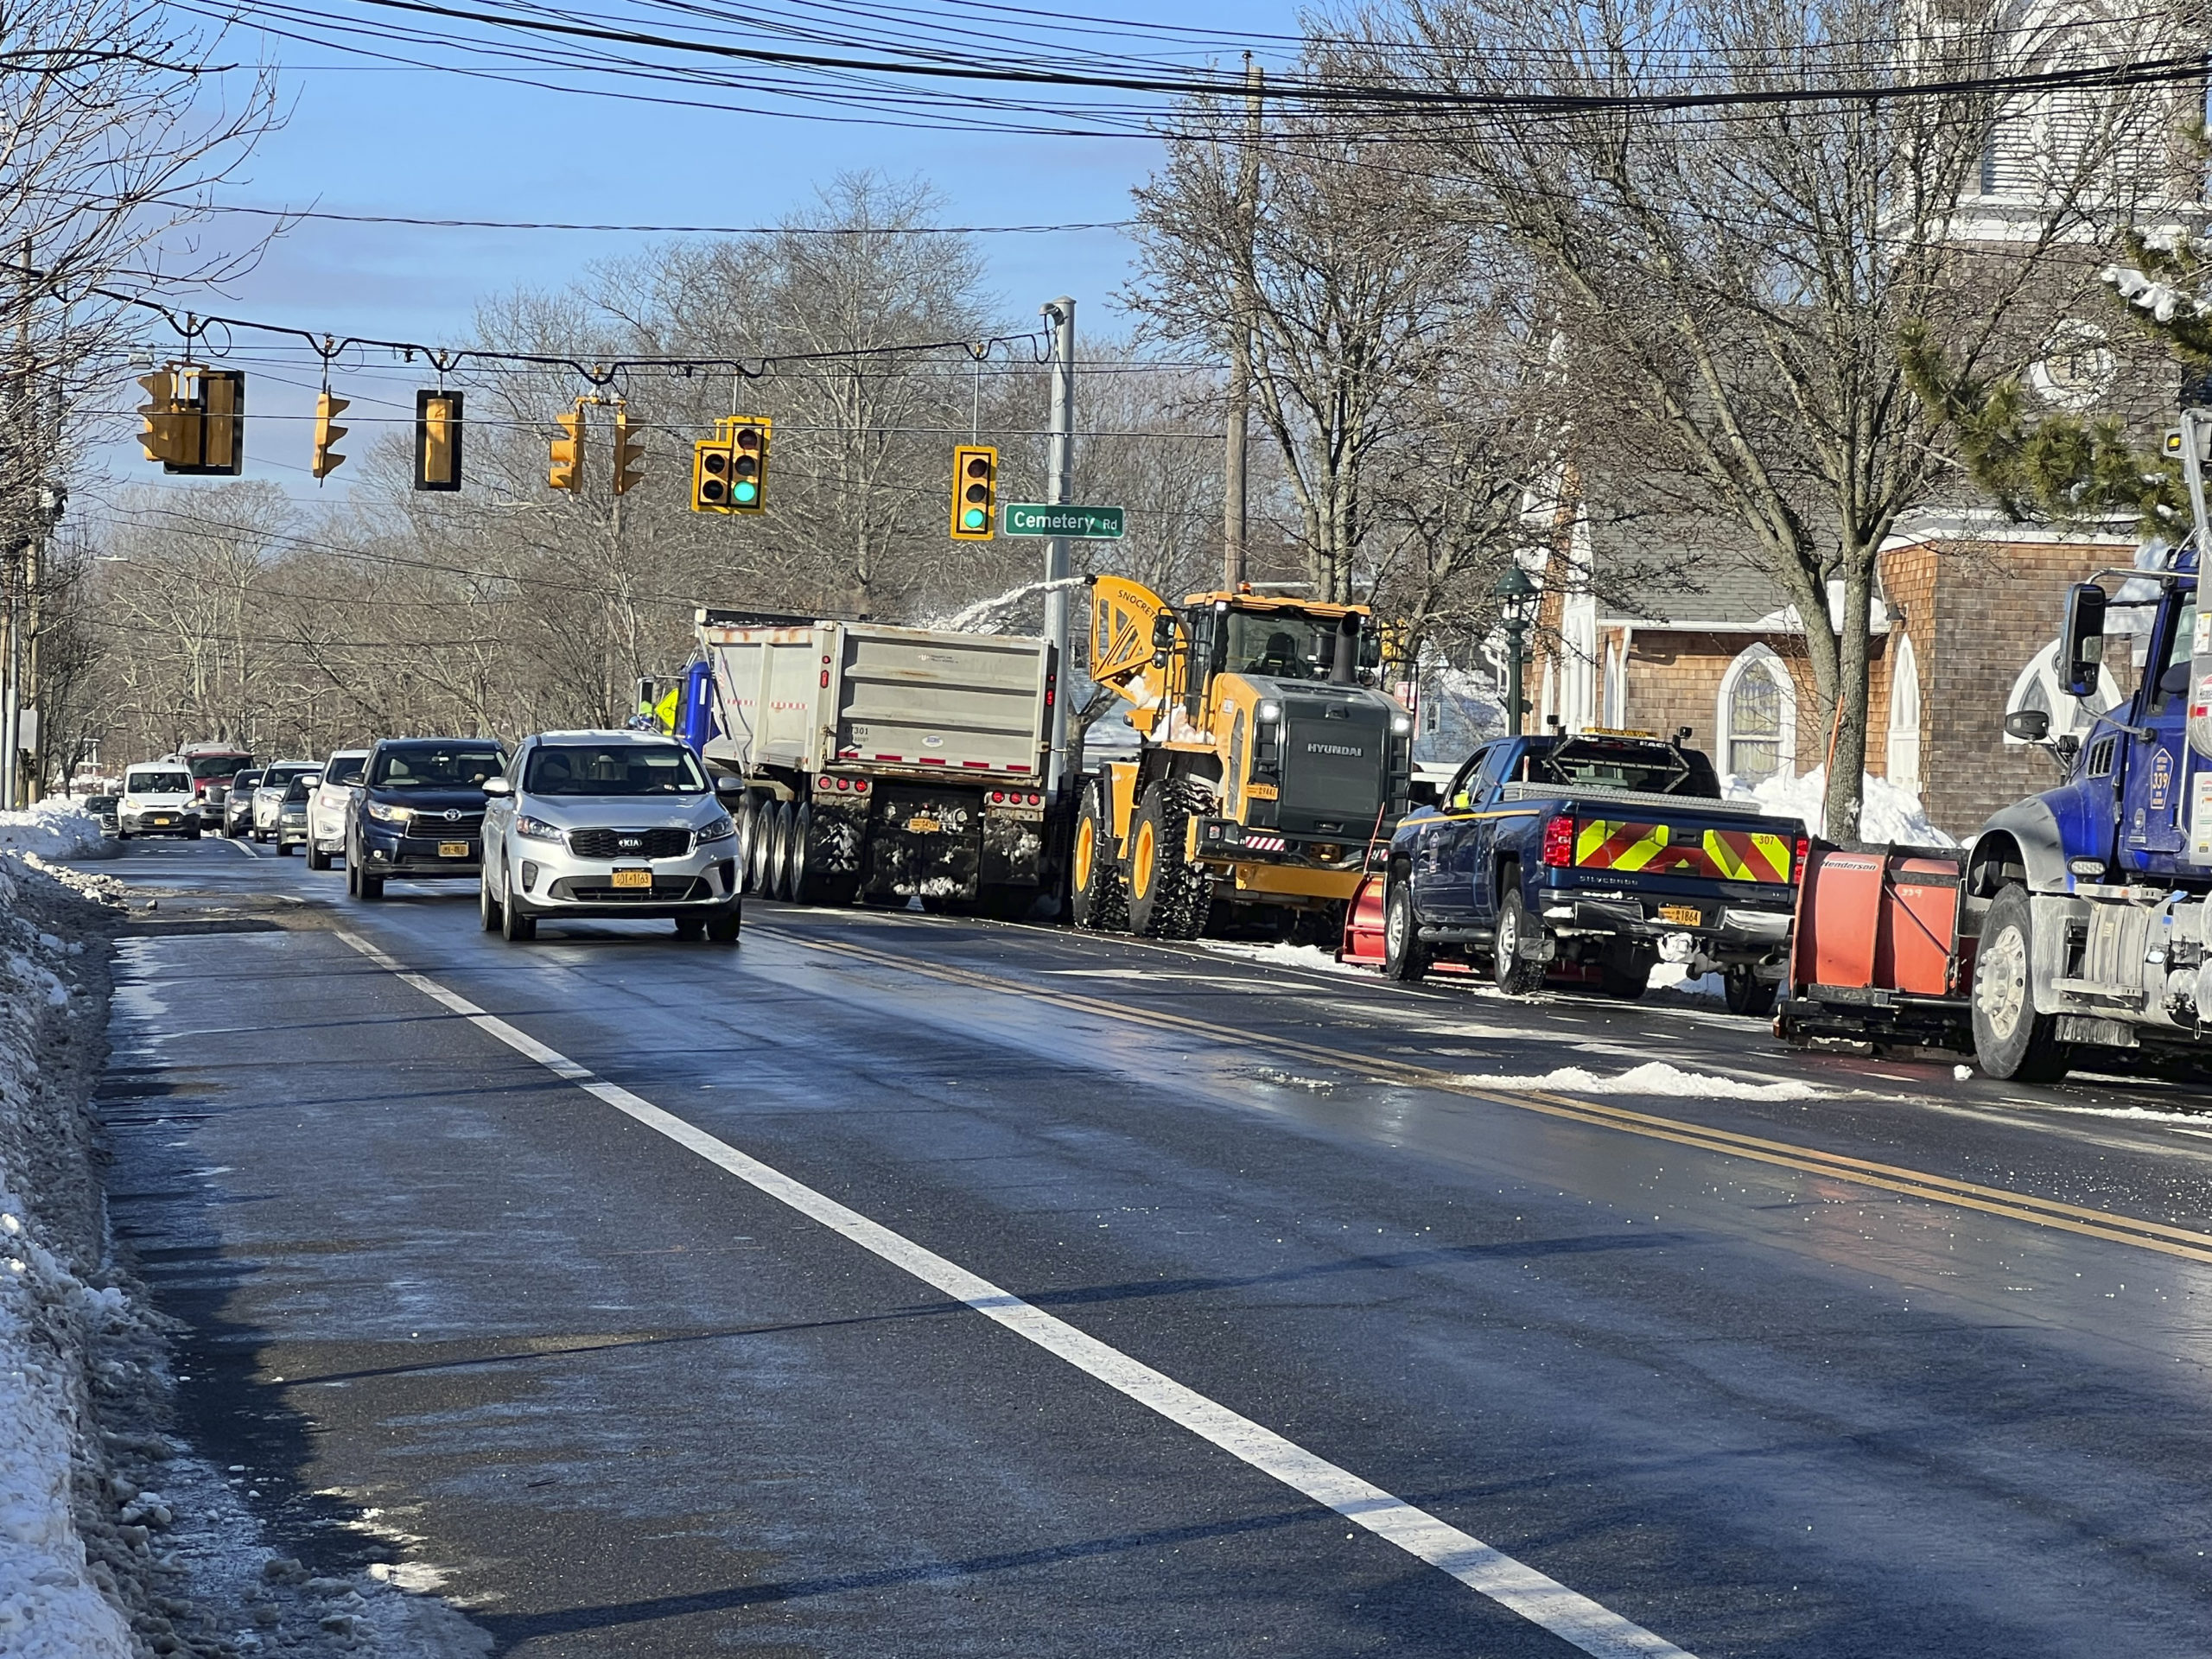 Snow was still being cleared on Montauk Highway in Hampton Bays on Tuesday morning. Municipalities, businesses and residents are still digging out after a massive storm blew through the area over the weekend.  DANA SHAW